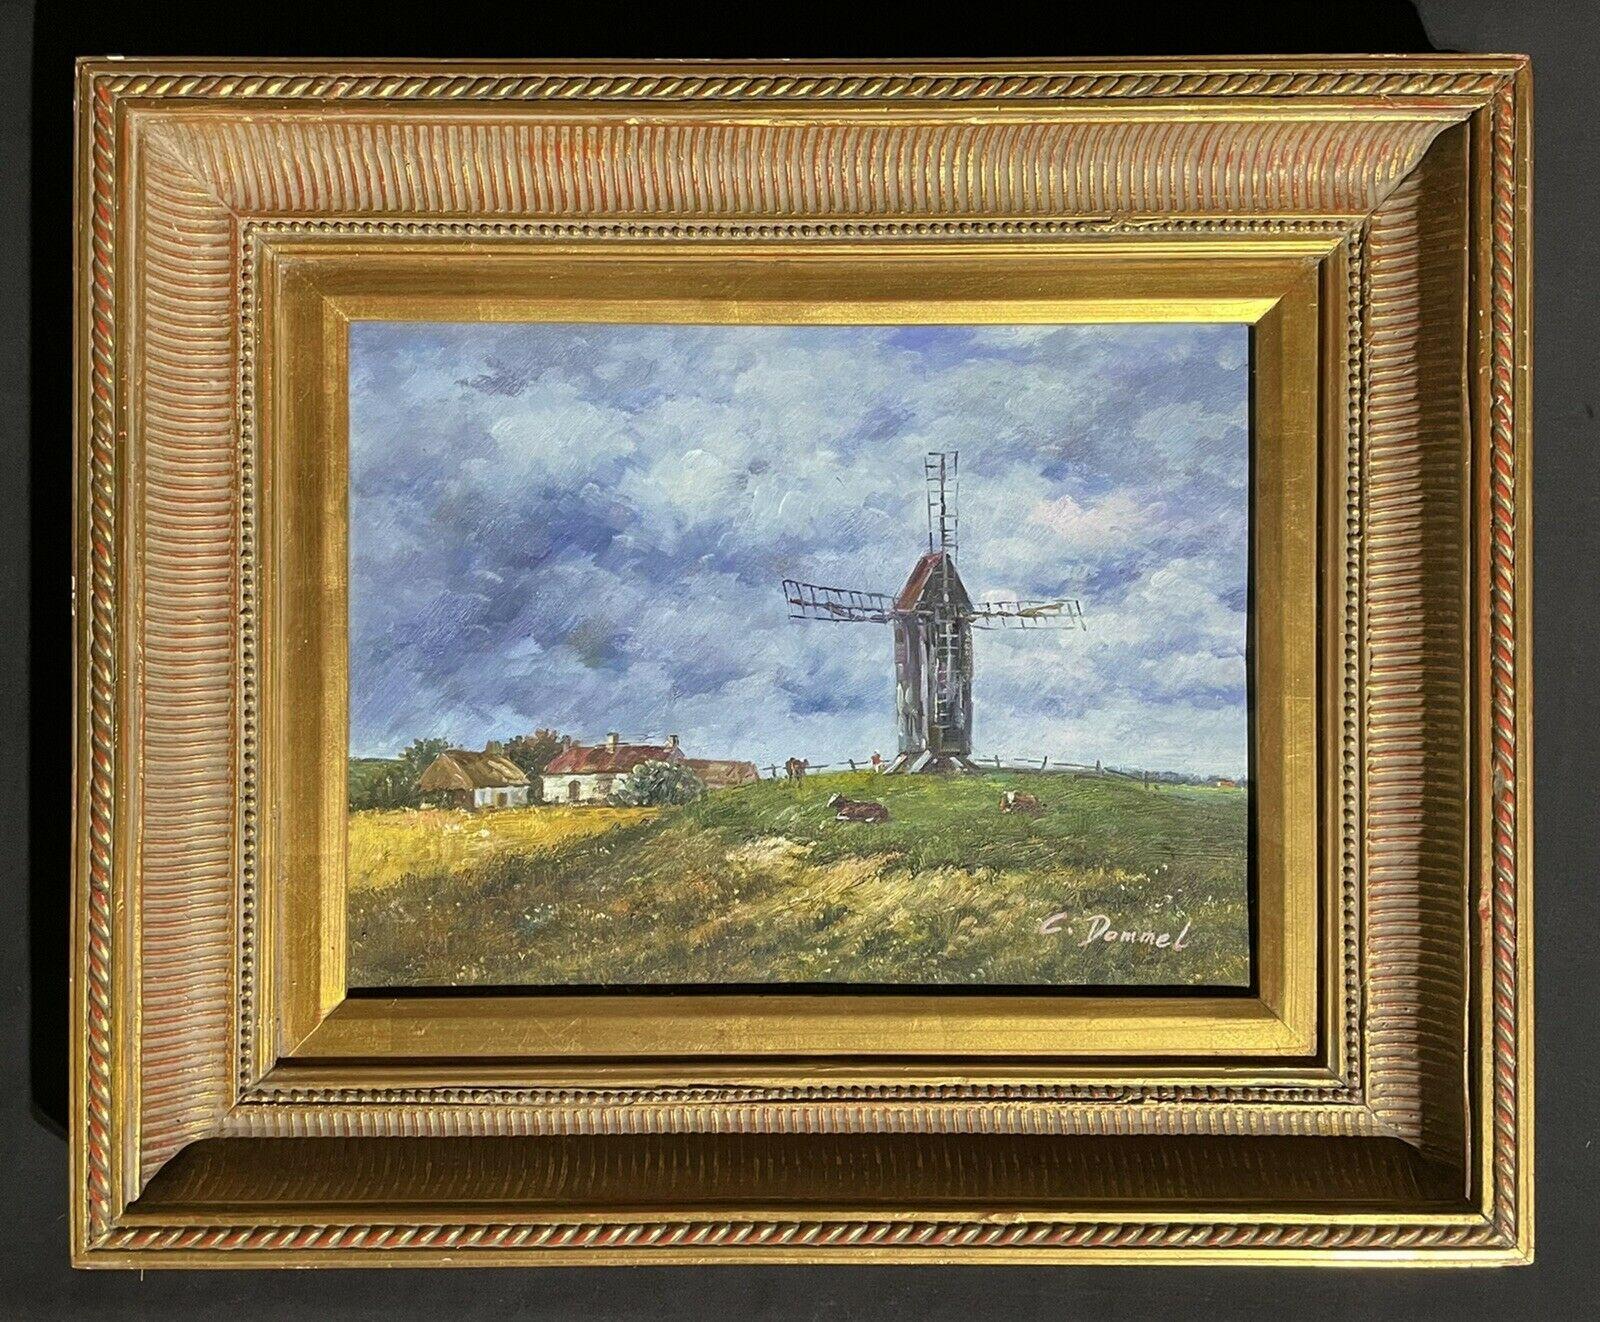 Unknown Landscape Painting - SIGNED FRENCH IMPRESSIONIST OIL PAINTING - WINDMILL IN RURAL FARM LANDSCAPE